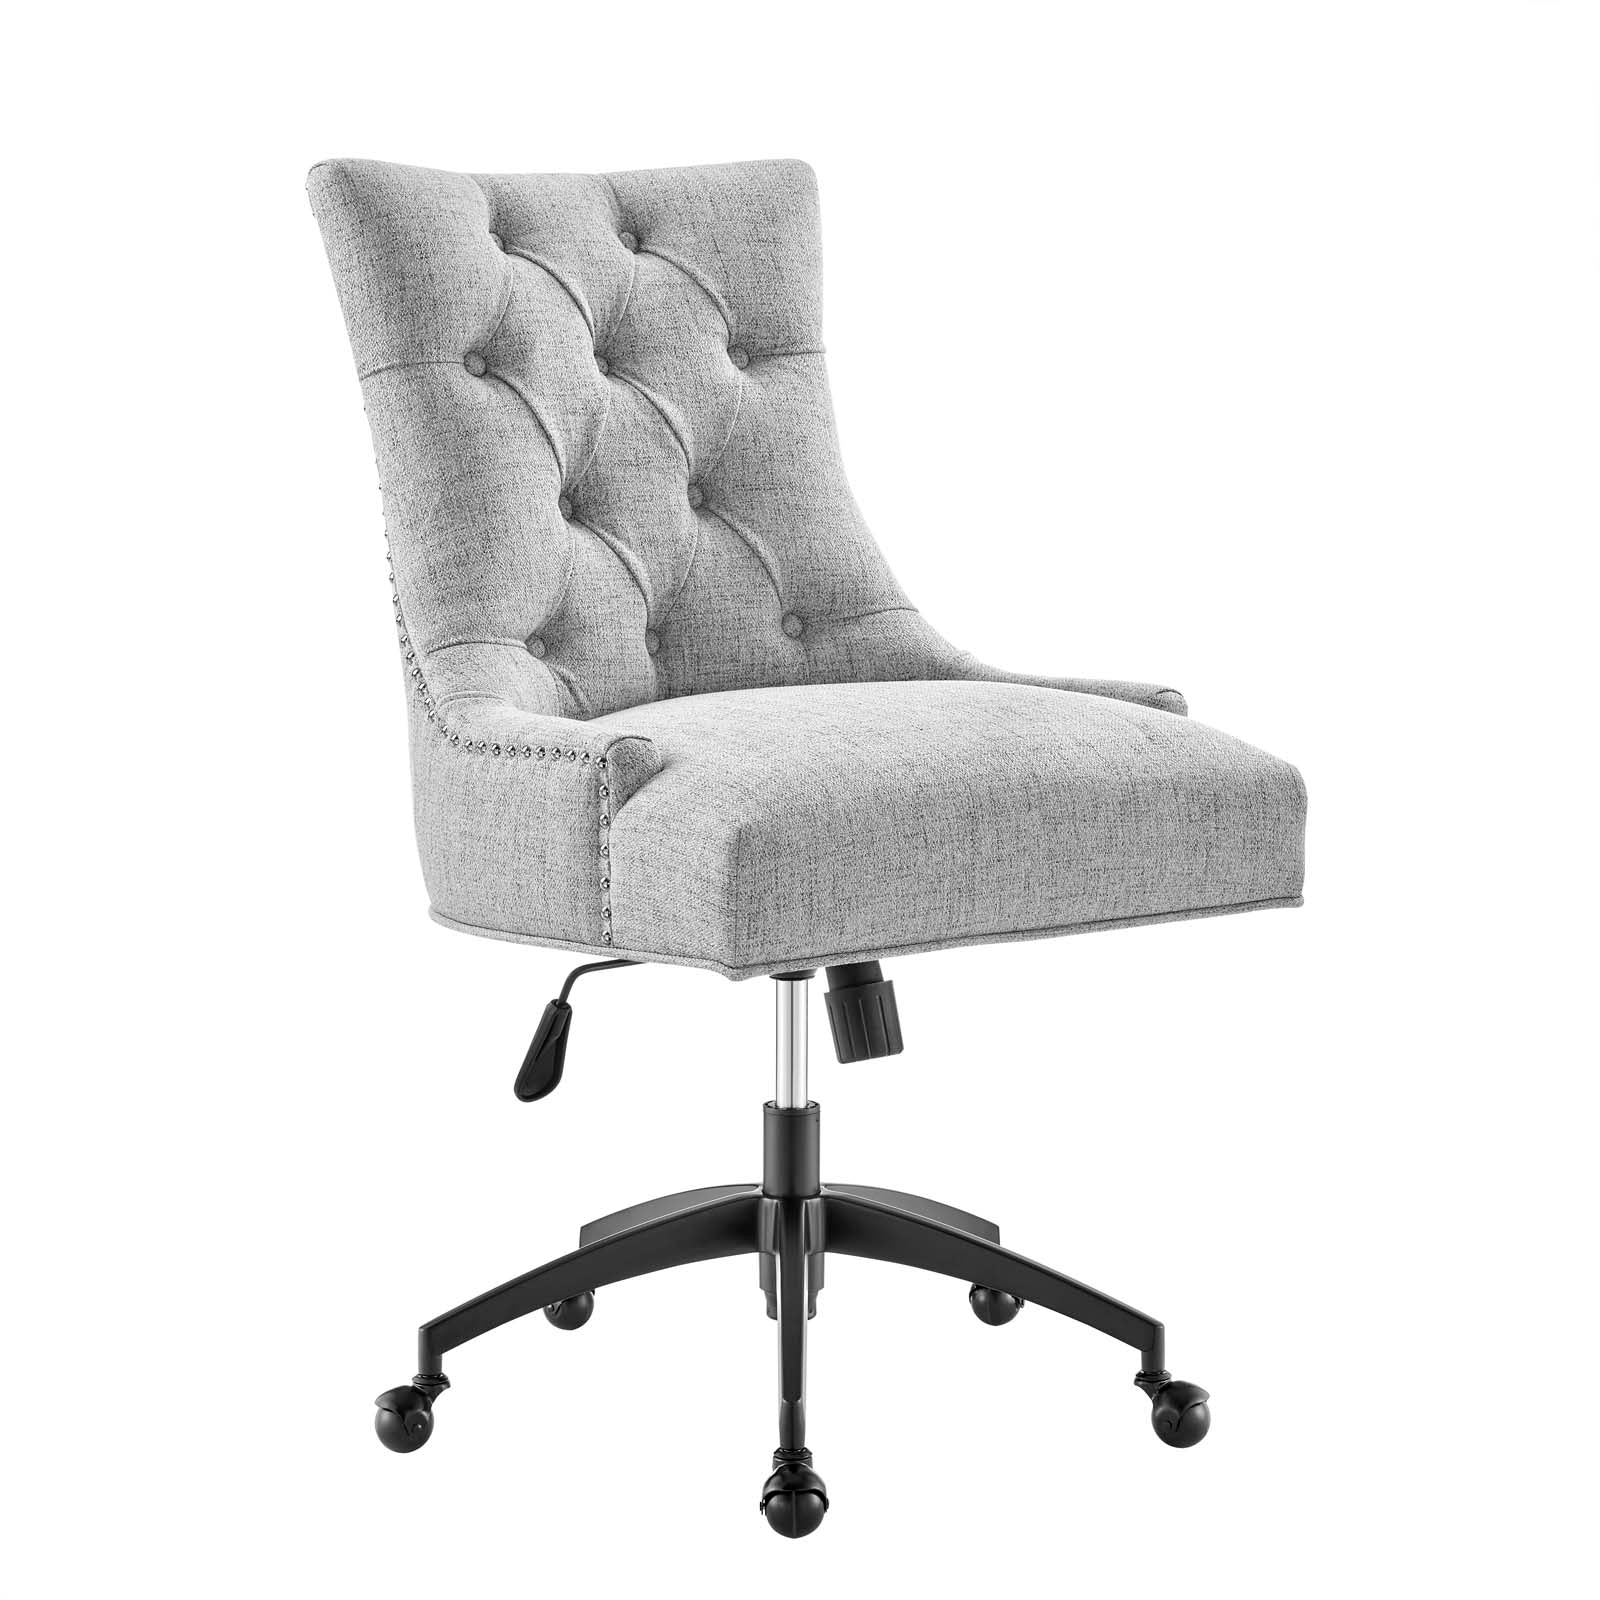 Modway Task Chairs - Regent Tufted Fabric Office Chair Black Light Gray